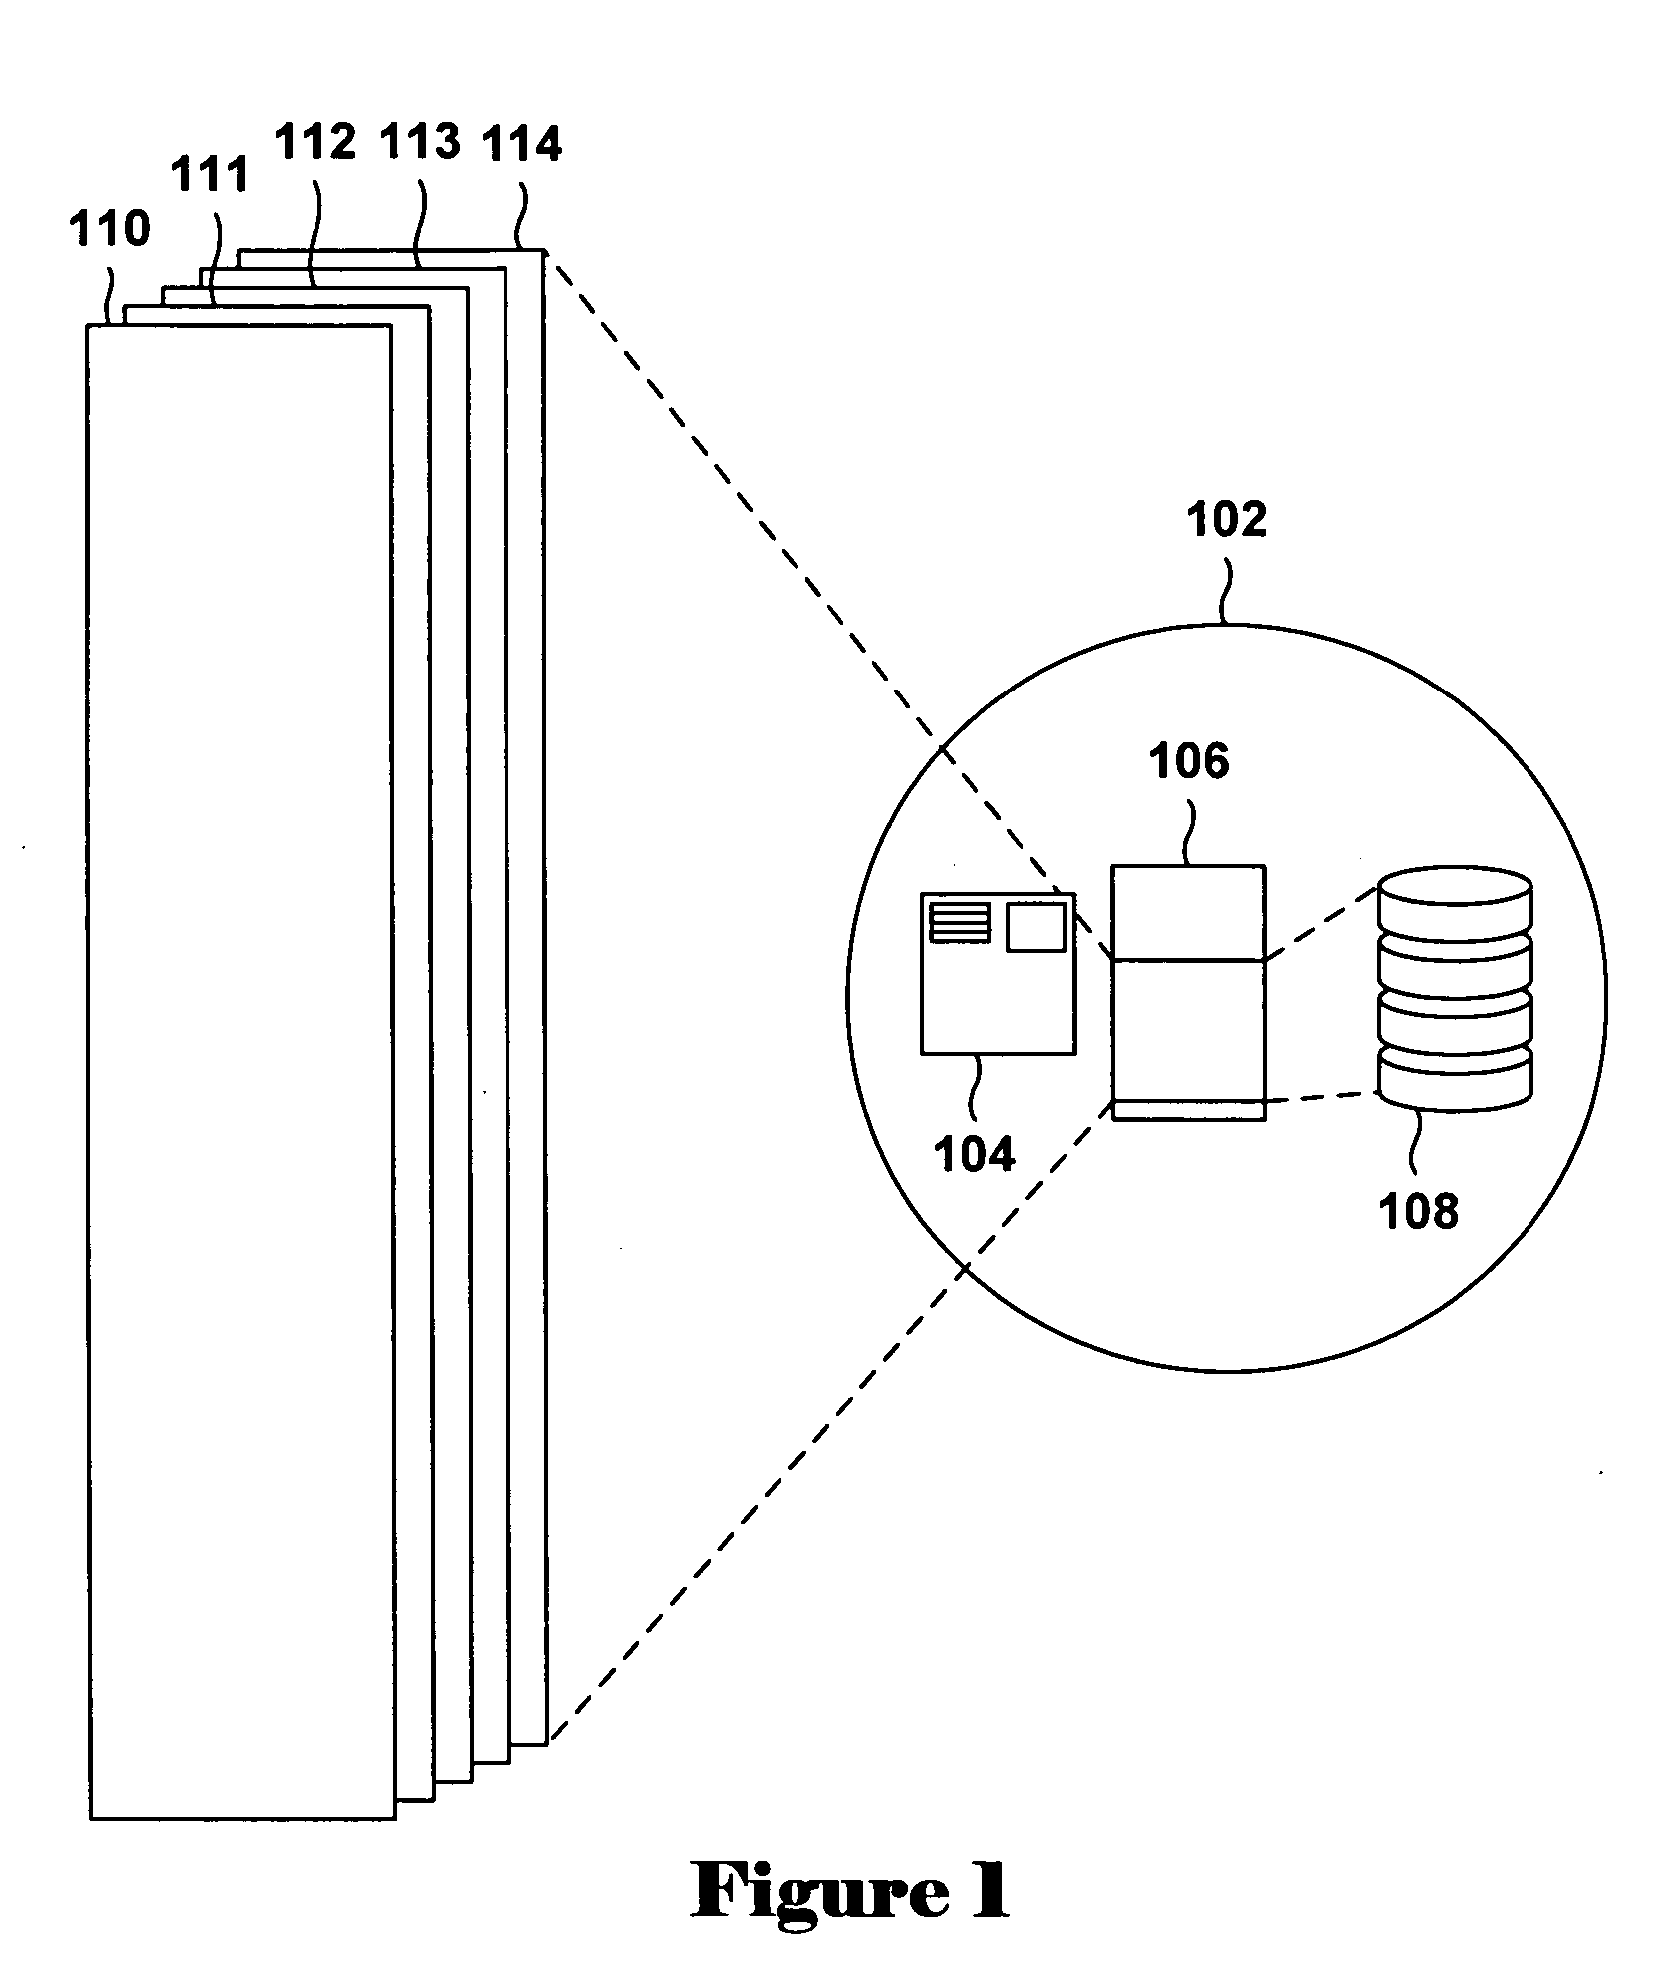 Method for efficient virtualization of physical memory in a virtual-machine monitor